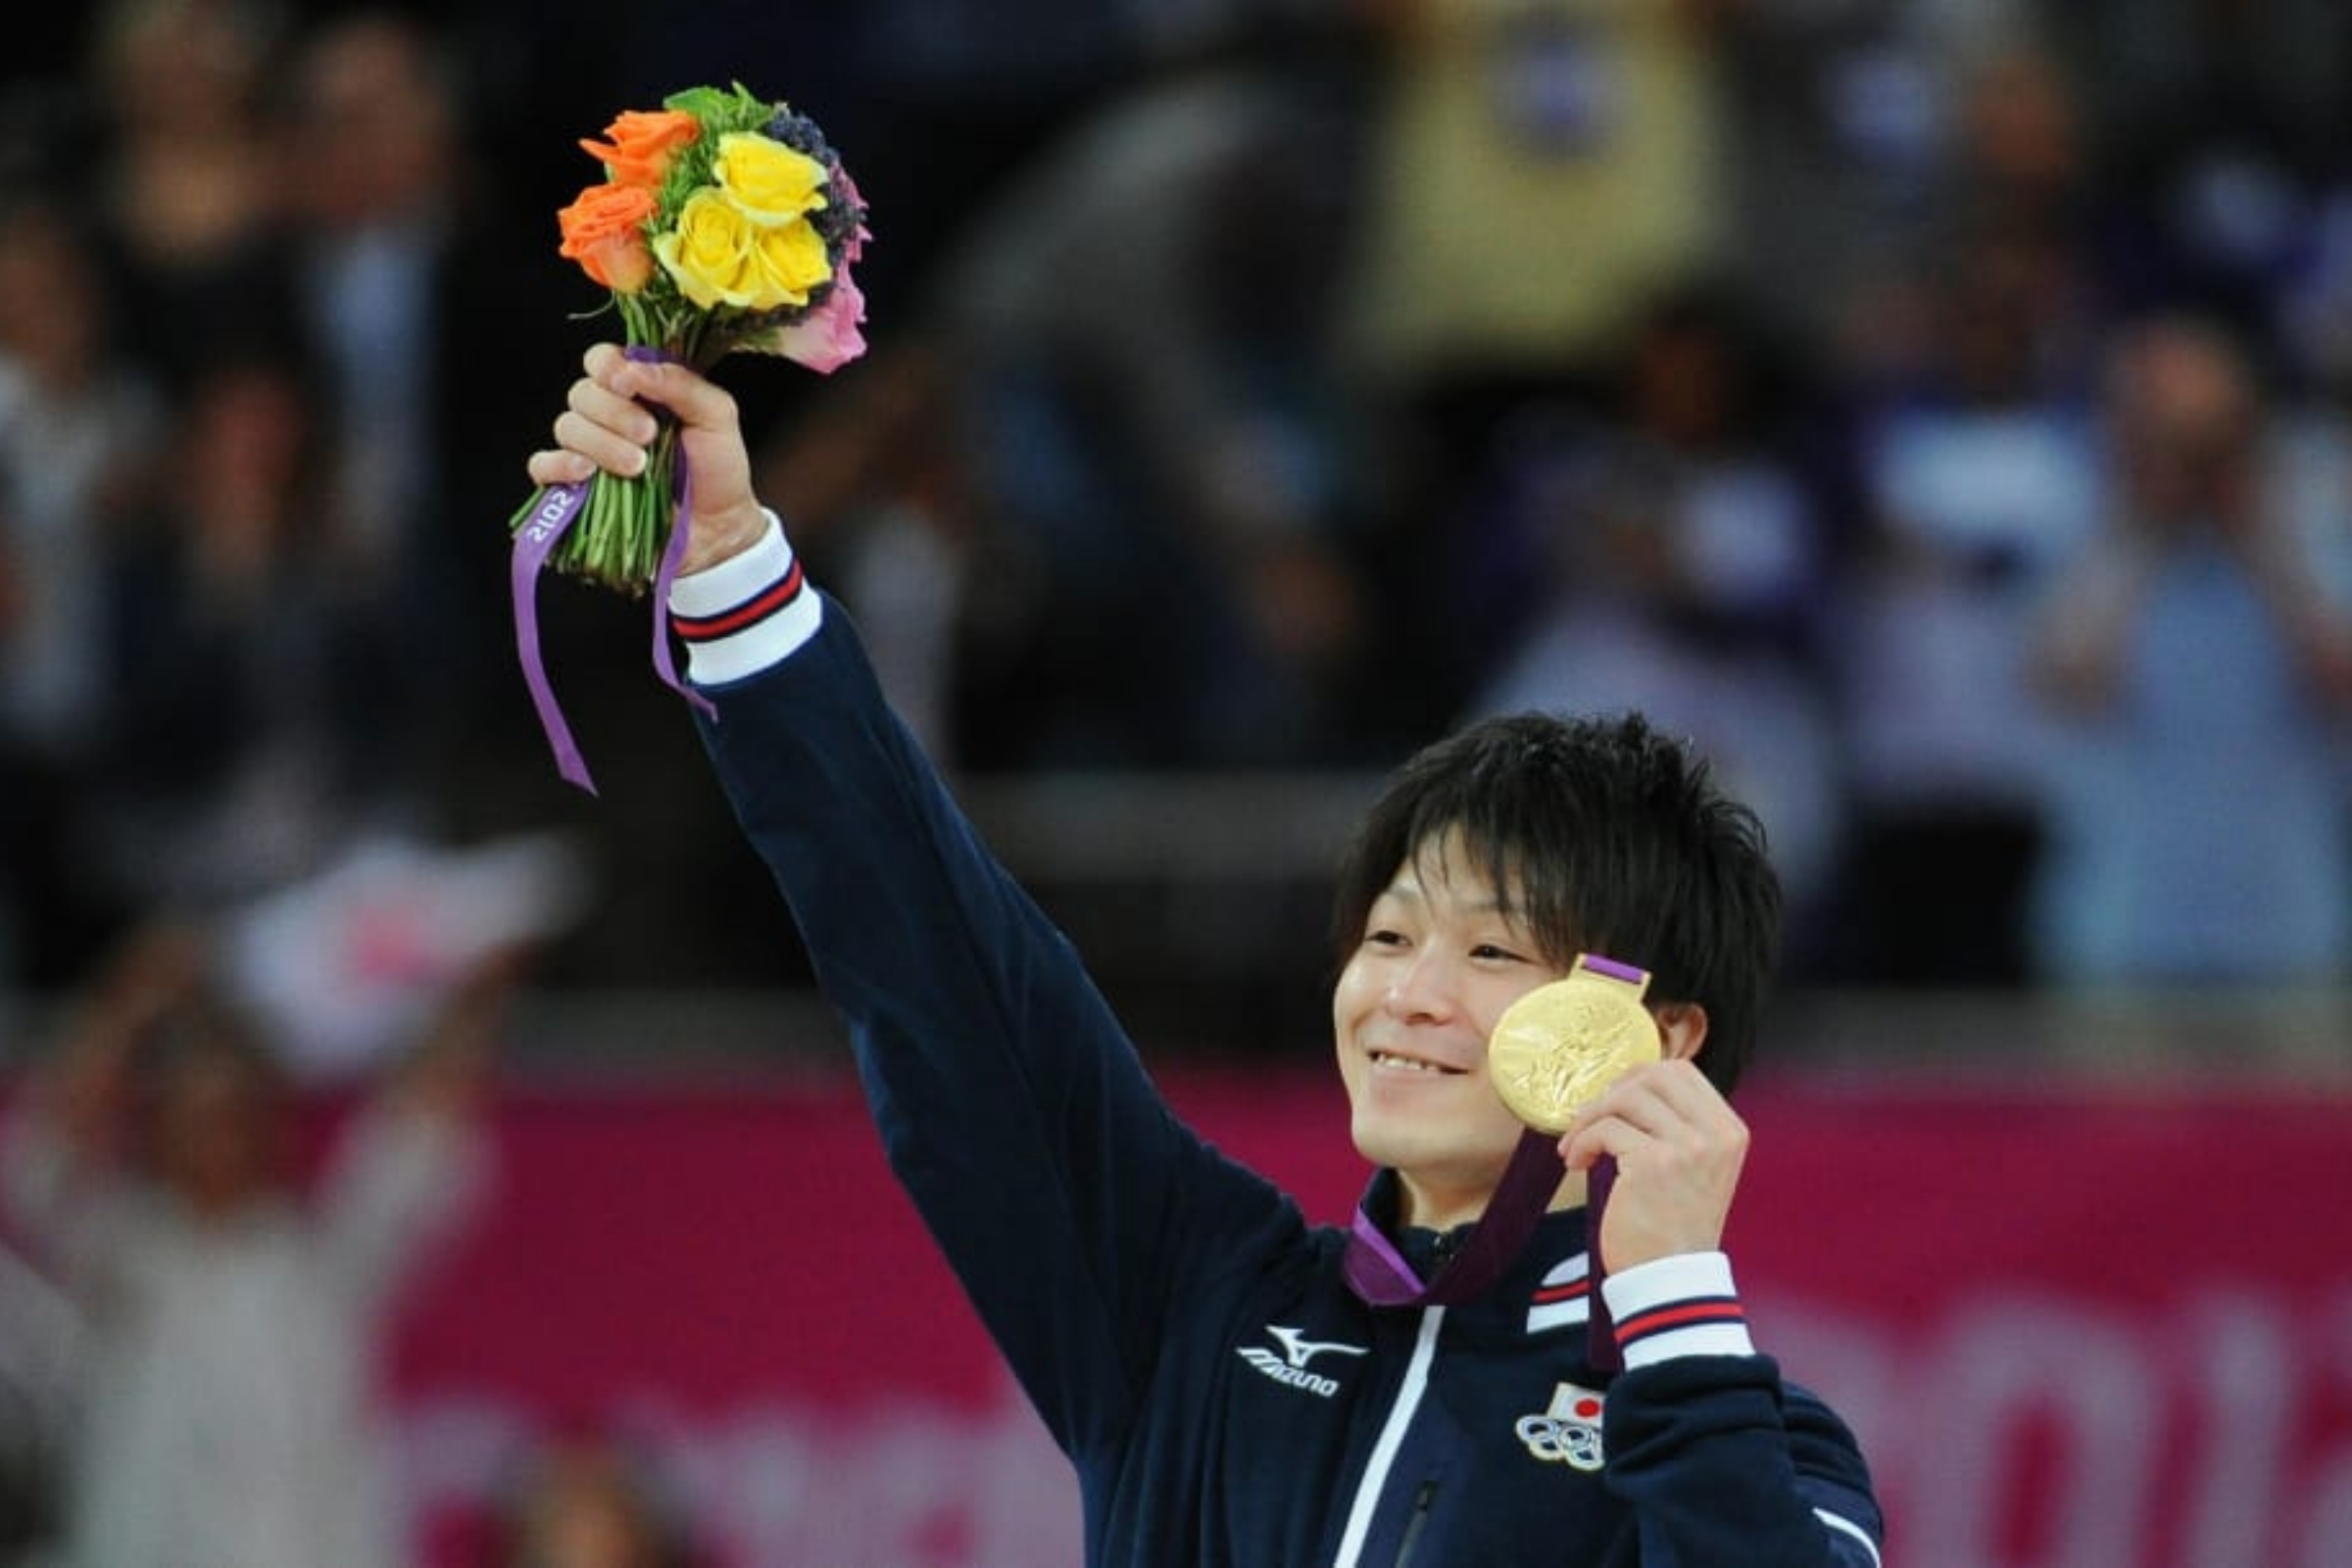 the-flowers-used-for-the-poignant-olympic-victory-bouquet-featured